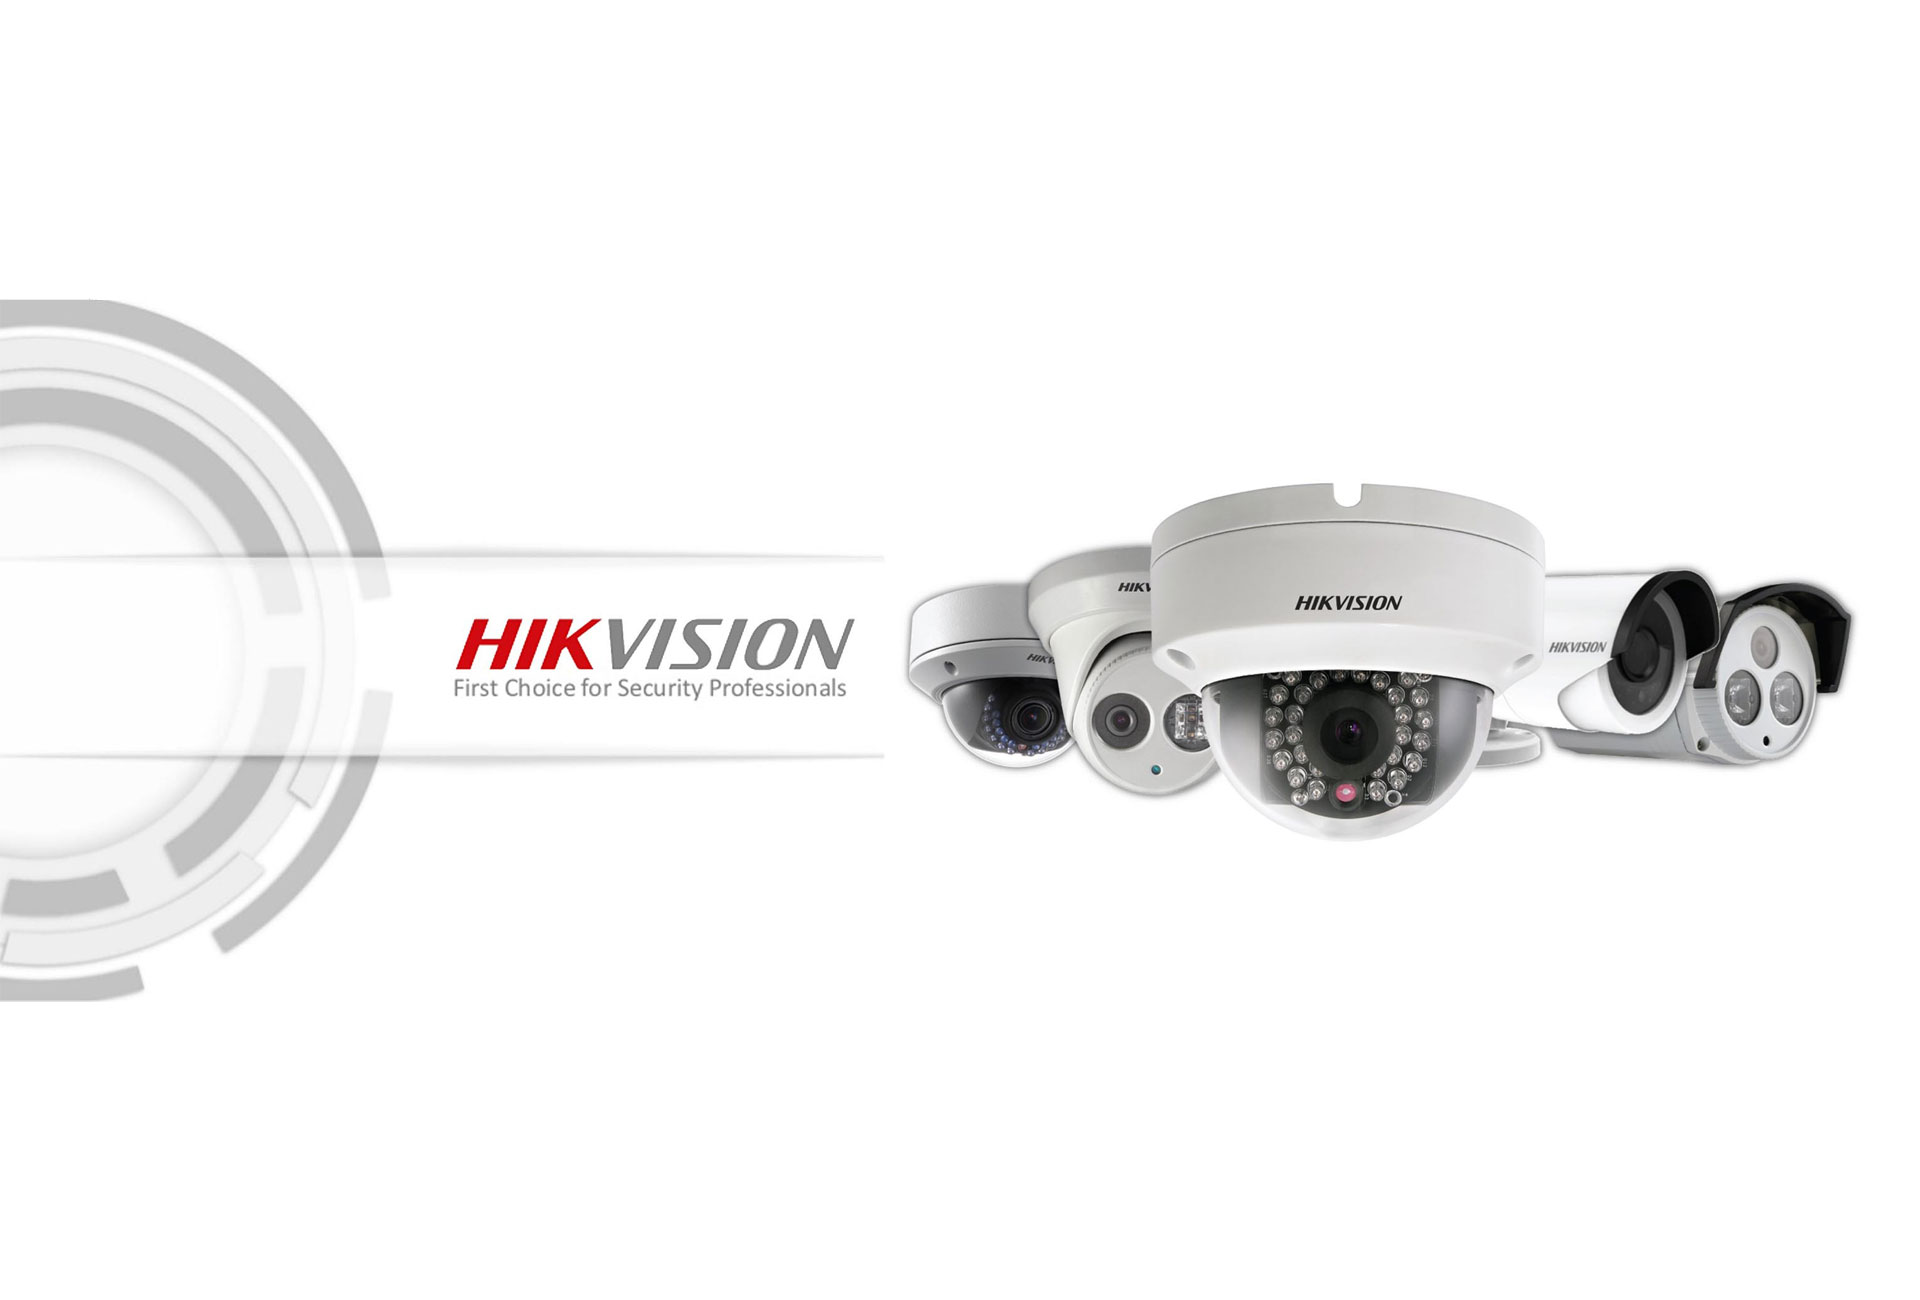 hd cctv camera for home